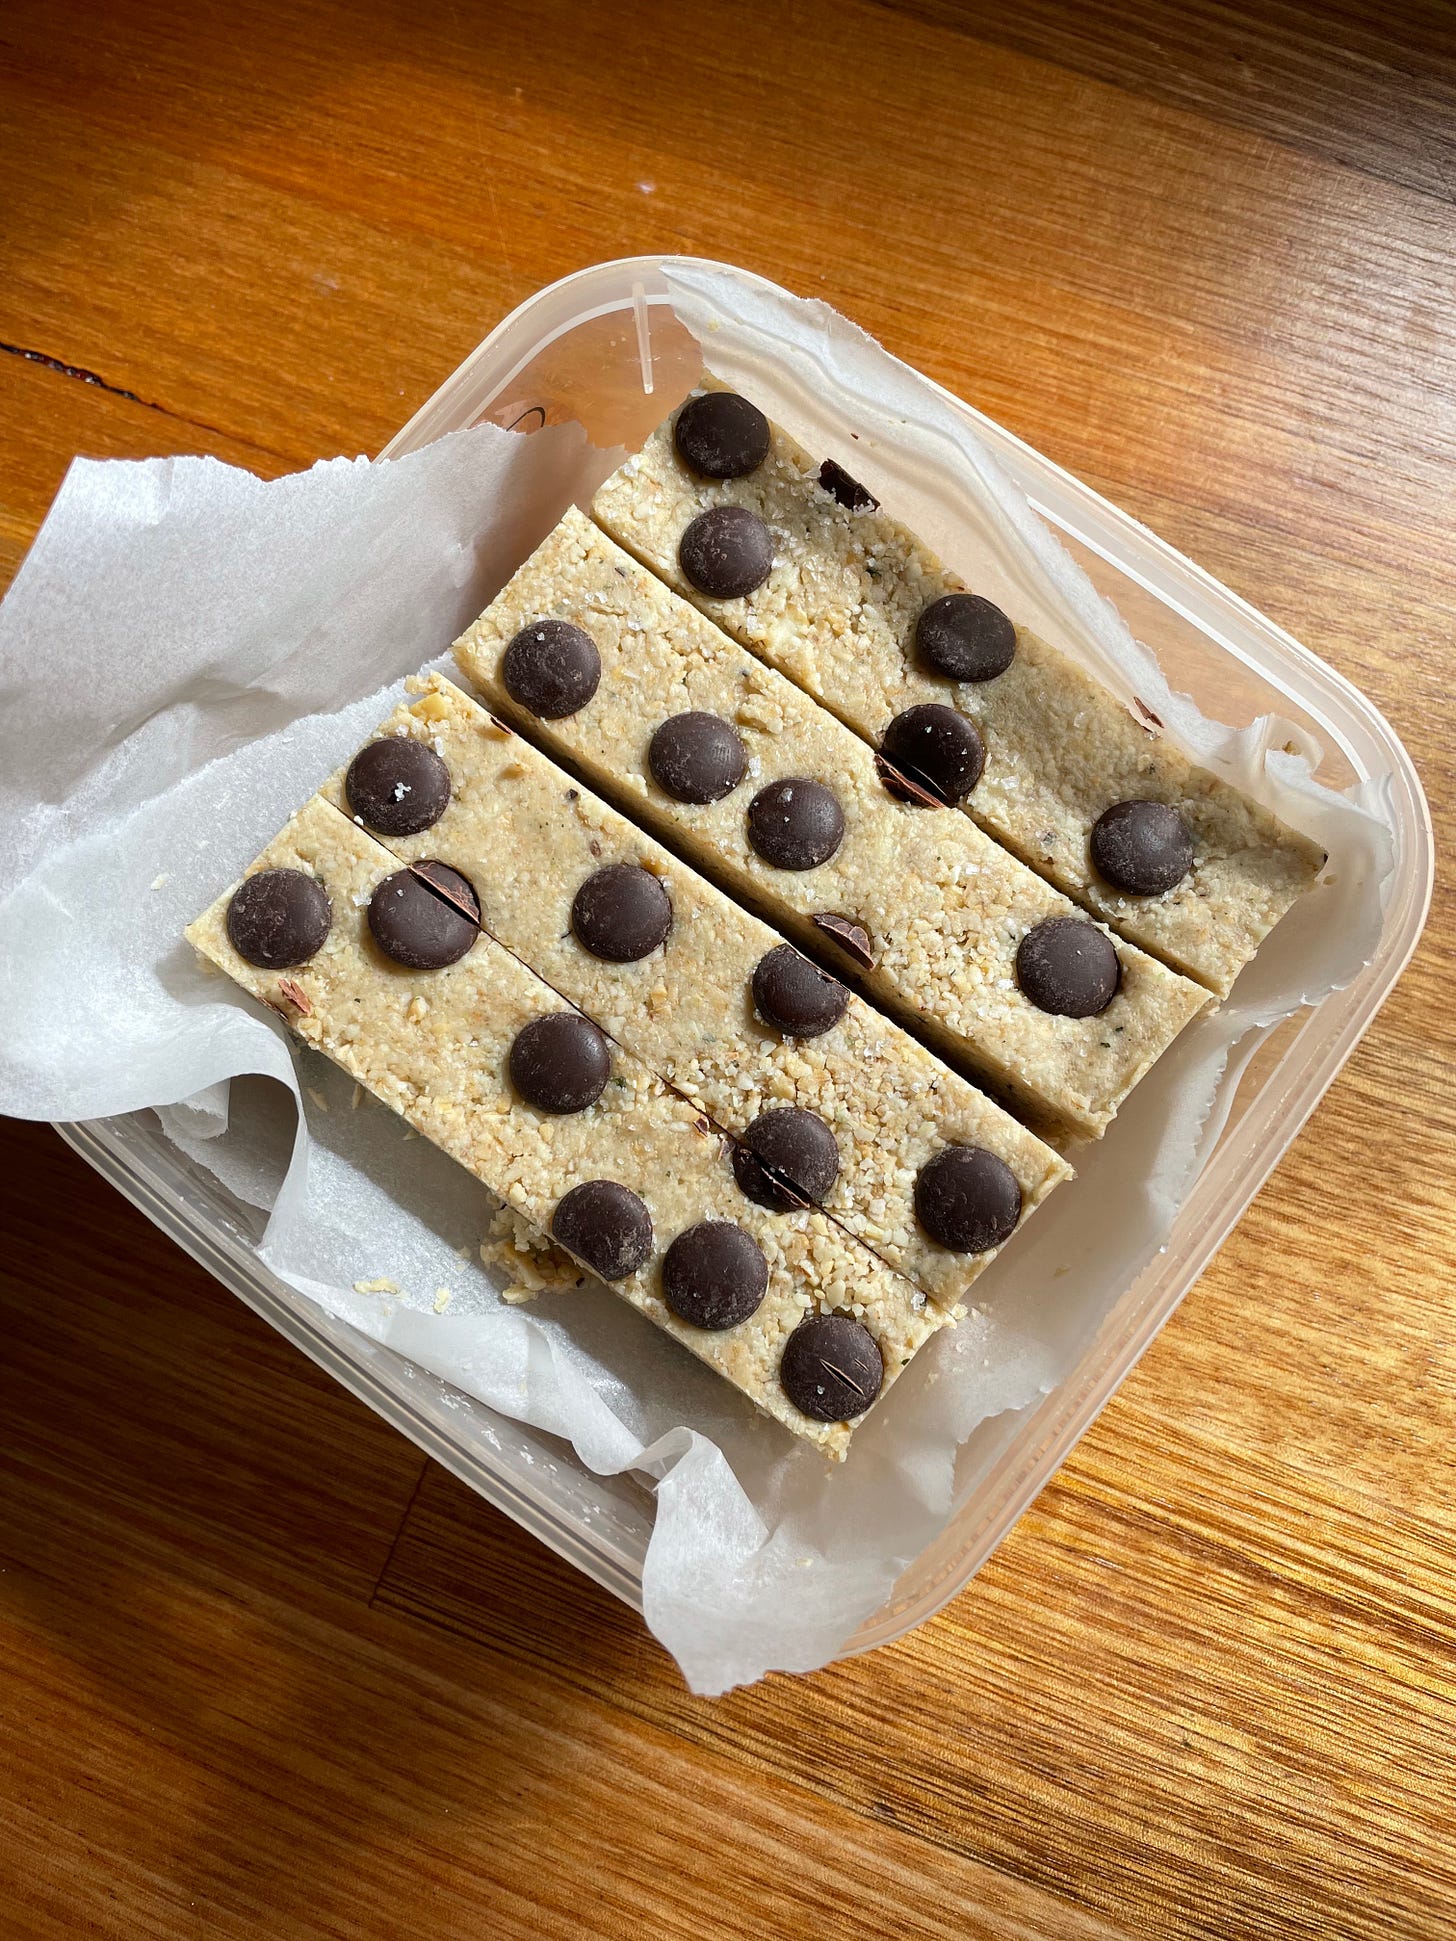 Container of homemade muesli bars with choc chips on top